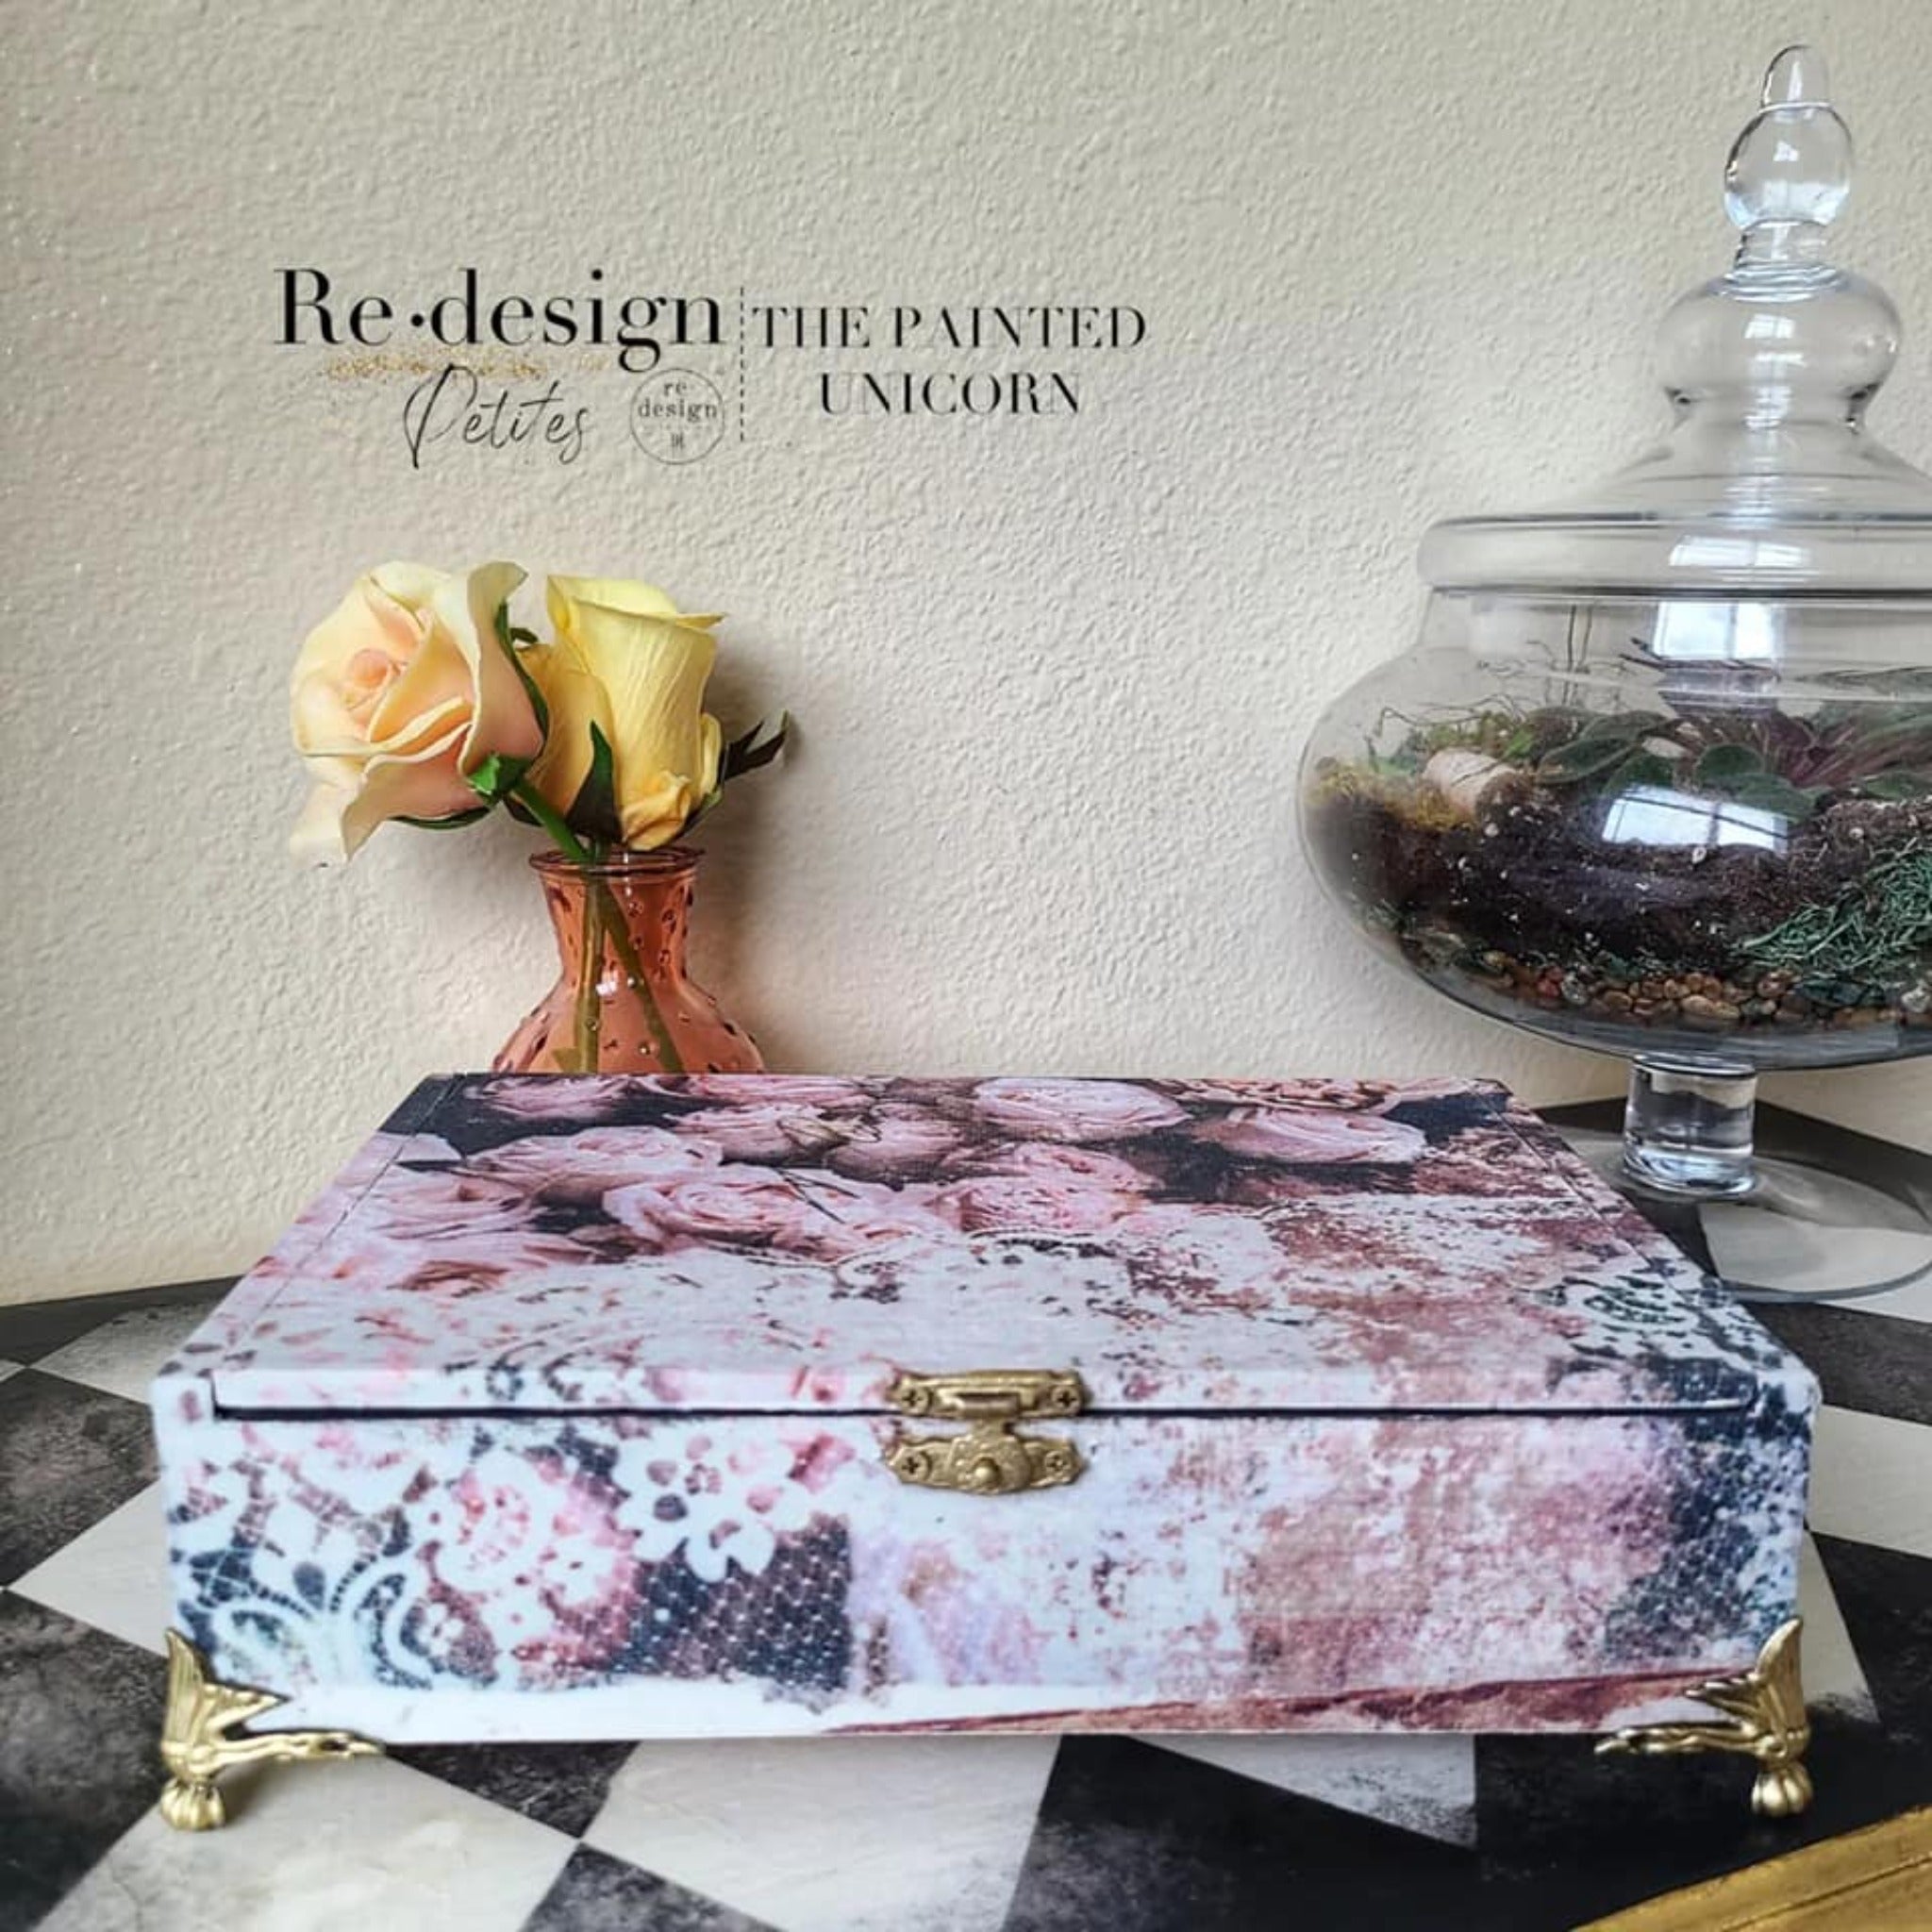 A small table top jewelry box refurbished by The Painted Unicorn features ReDesign with Prima's Beautiful Dream tissue paper all over it.